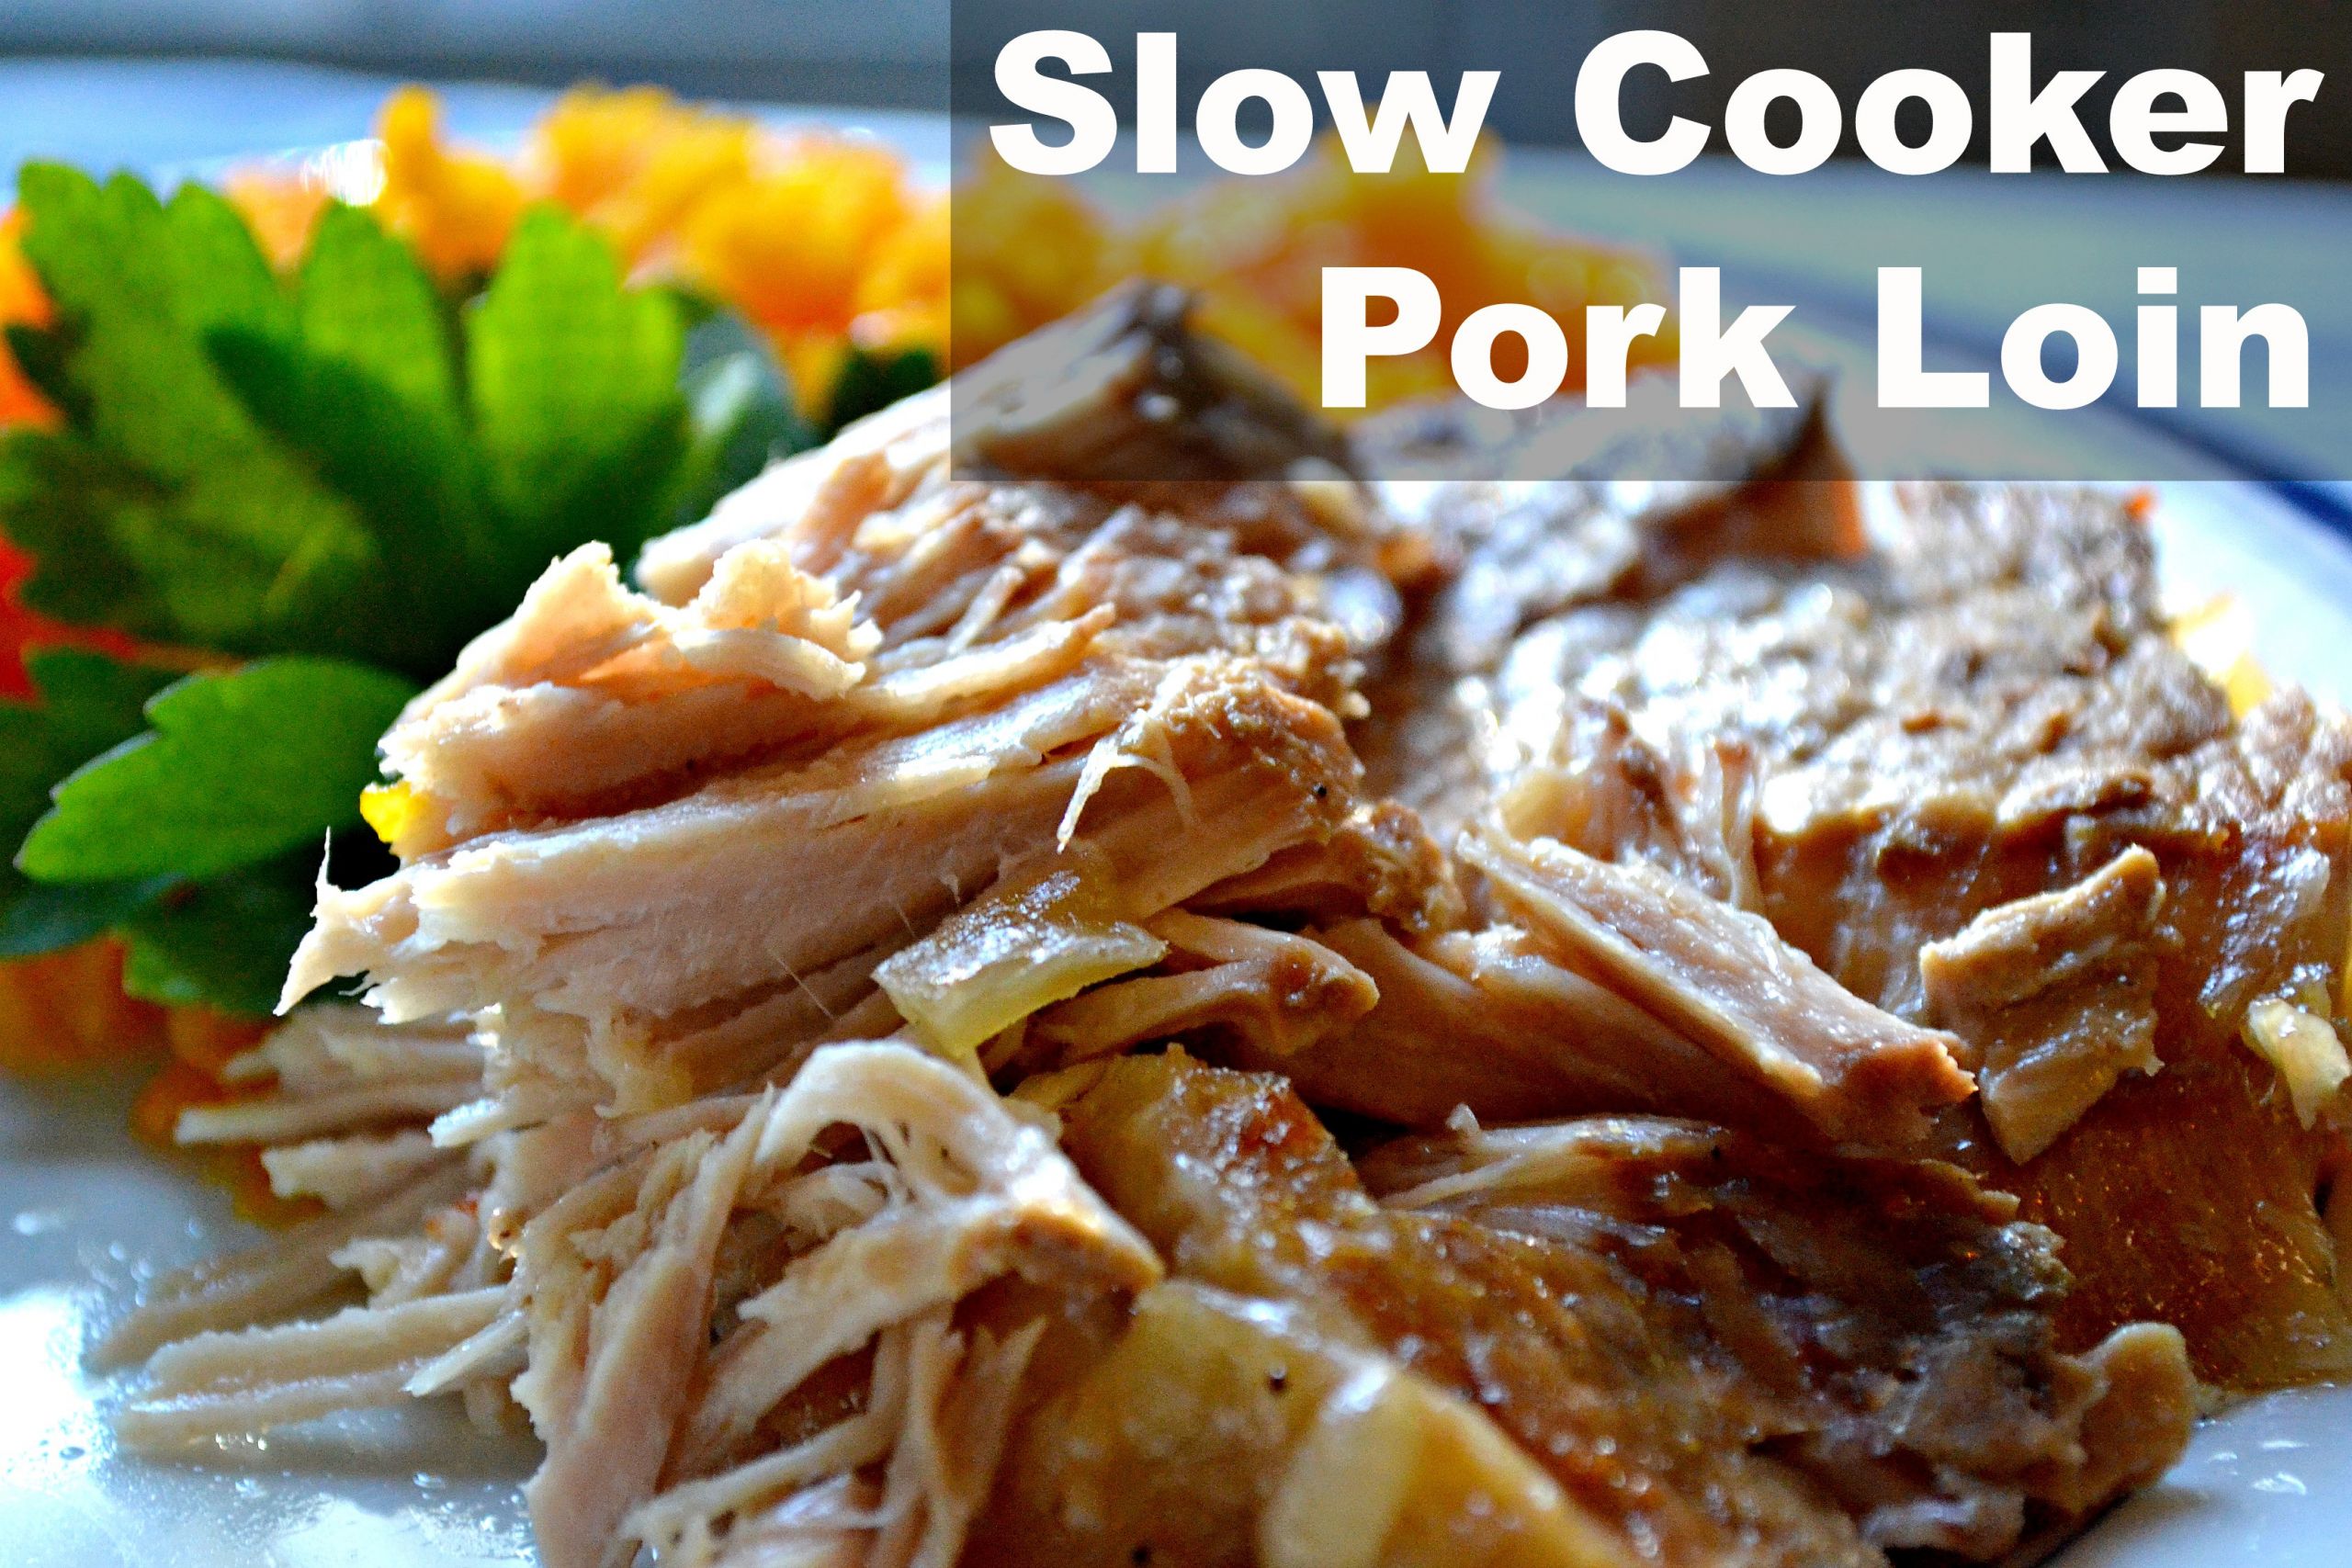 Pork Loin Chops Slow Cooker Recipes
 Two Slow Cooker Pork Loin Recipes Blissfully Domestic